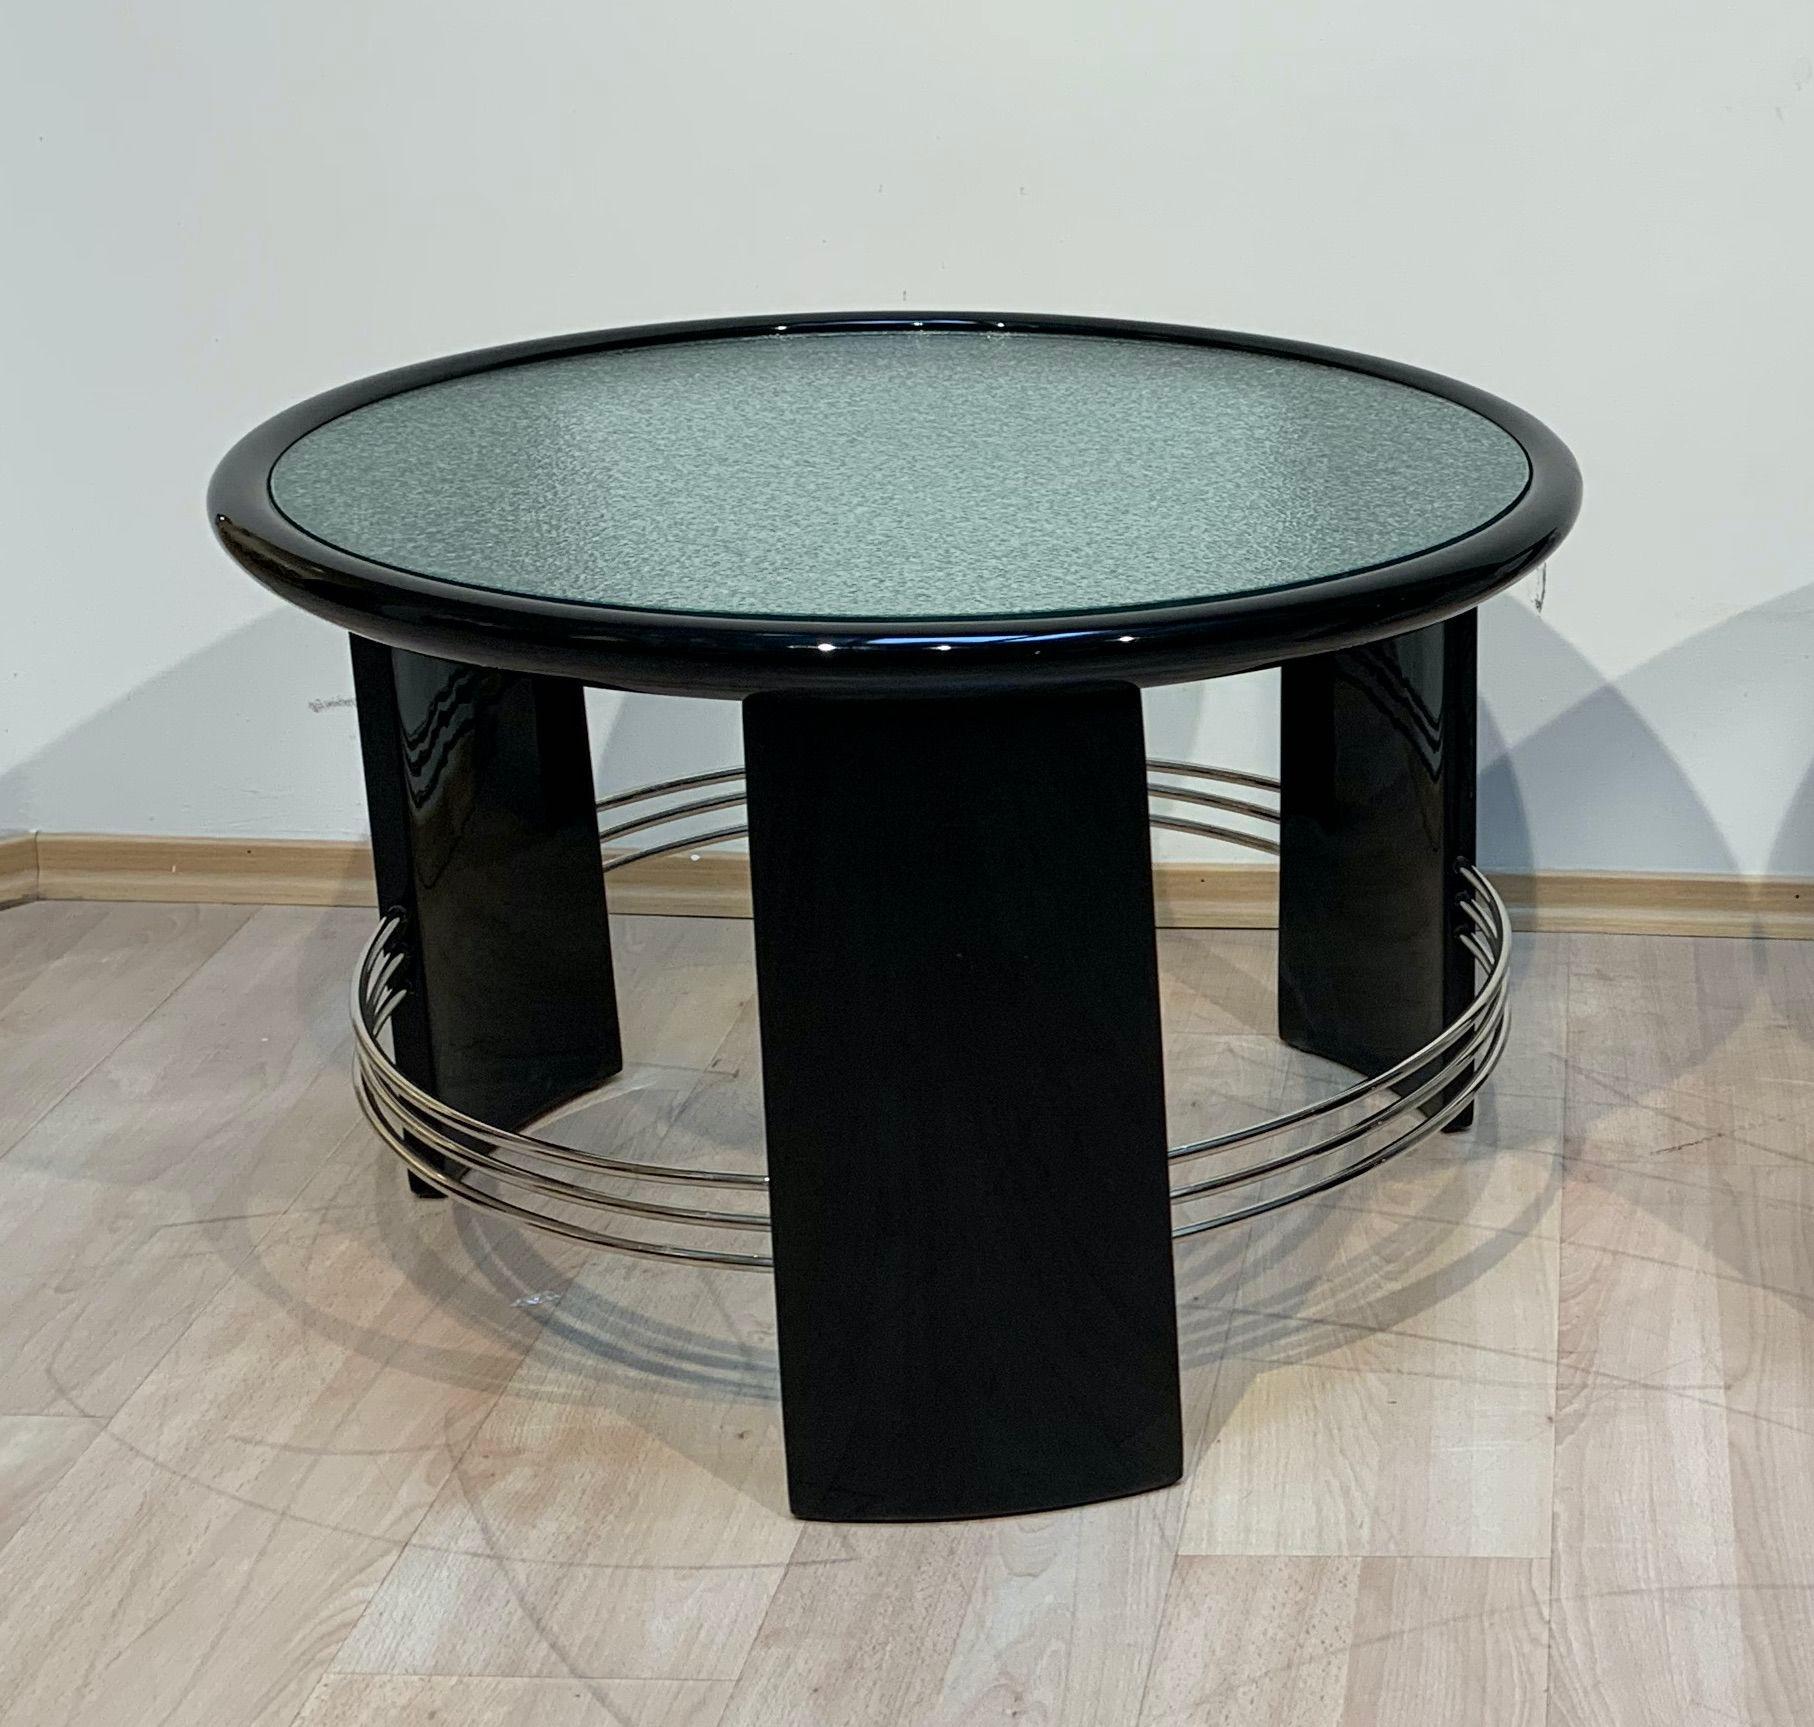 Art Deco Round Coffee Table, Black Lacquer, Chrome, Glass, France circa 1930 For Sale 2